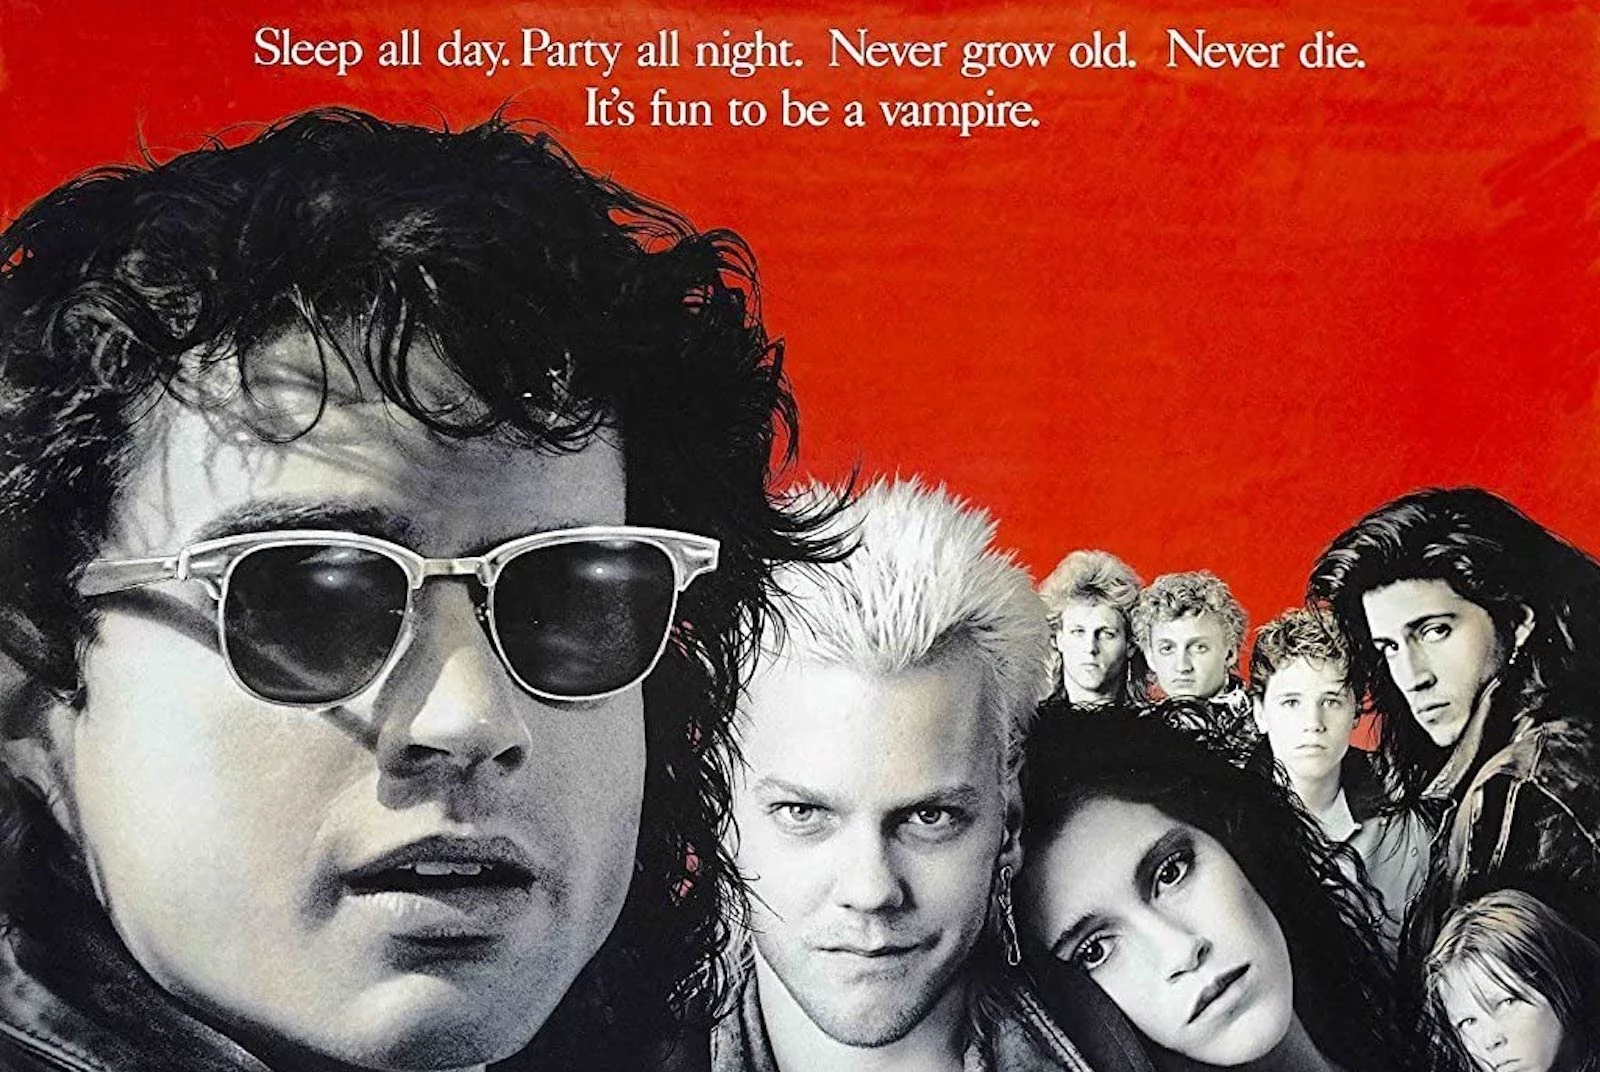 Armless Girl Fucked - 35 Years Ago: 'The Lost Boys' Resets the Vampire Genre